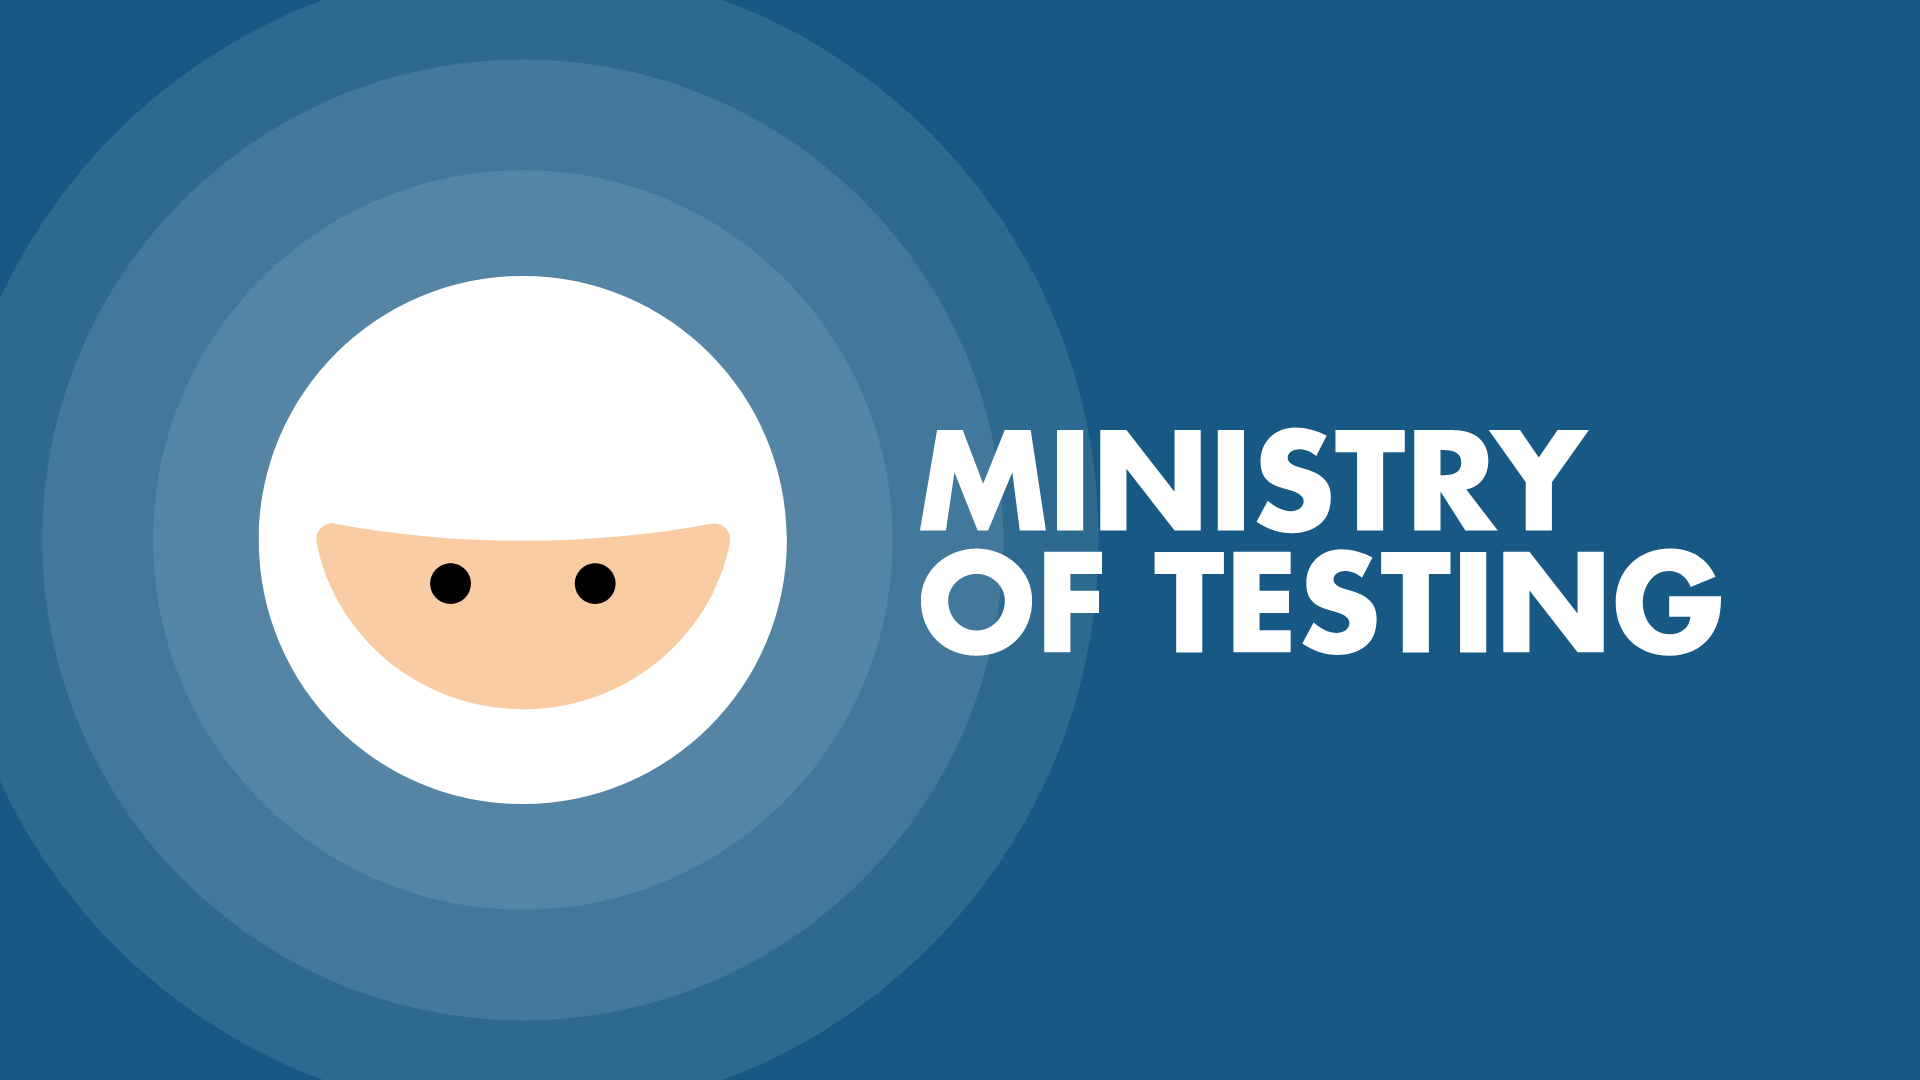 From An Editor's Desk: What I Look For In Ministry of Testing Articles